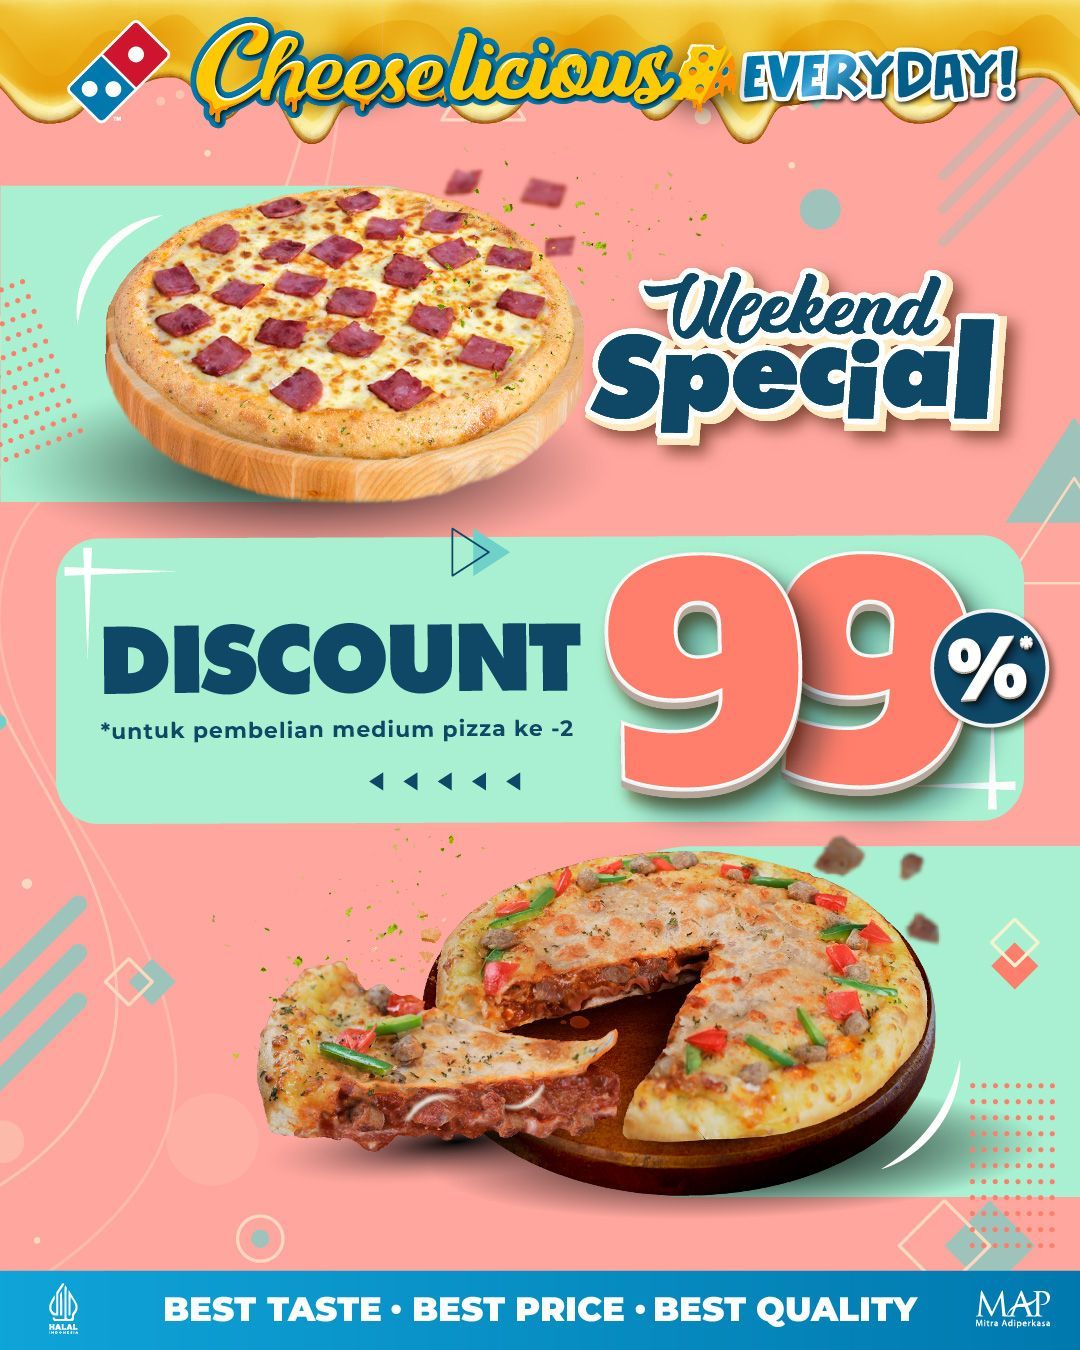 PROMO DOMINO'S PIZZA WEEKEND SPECIAL DISKON 99%